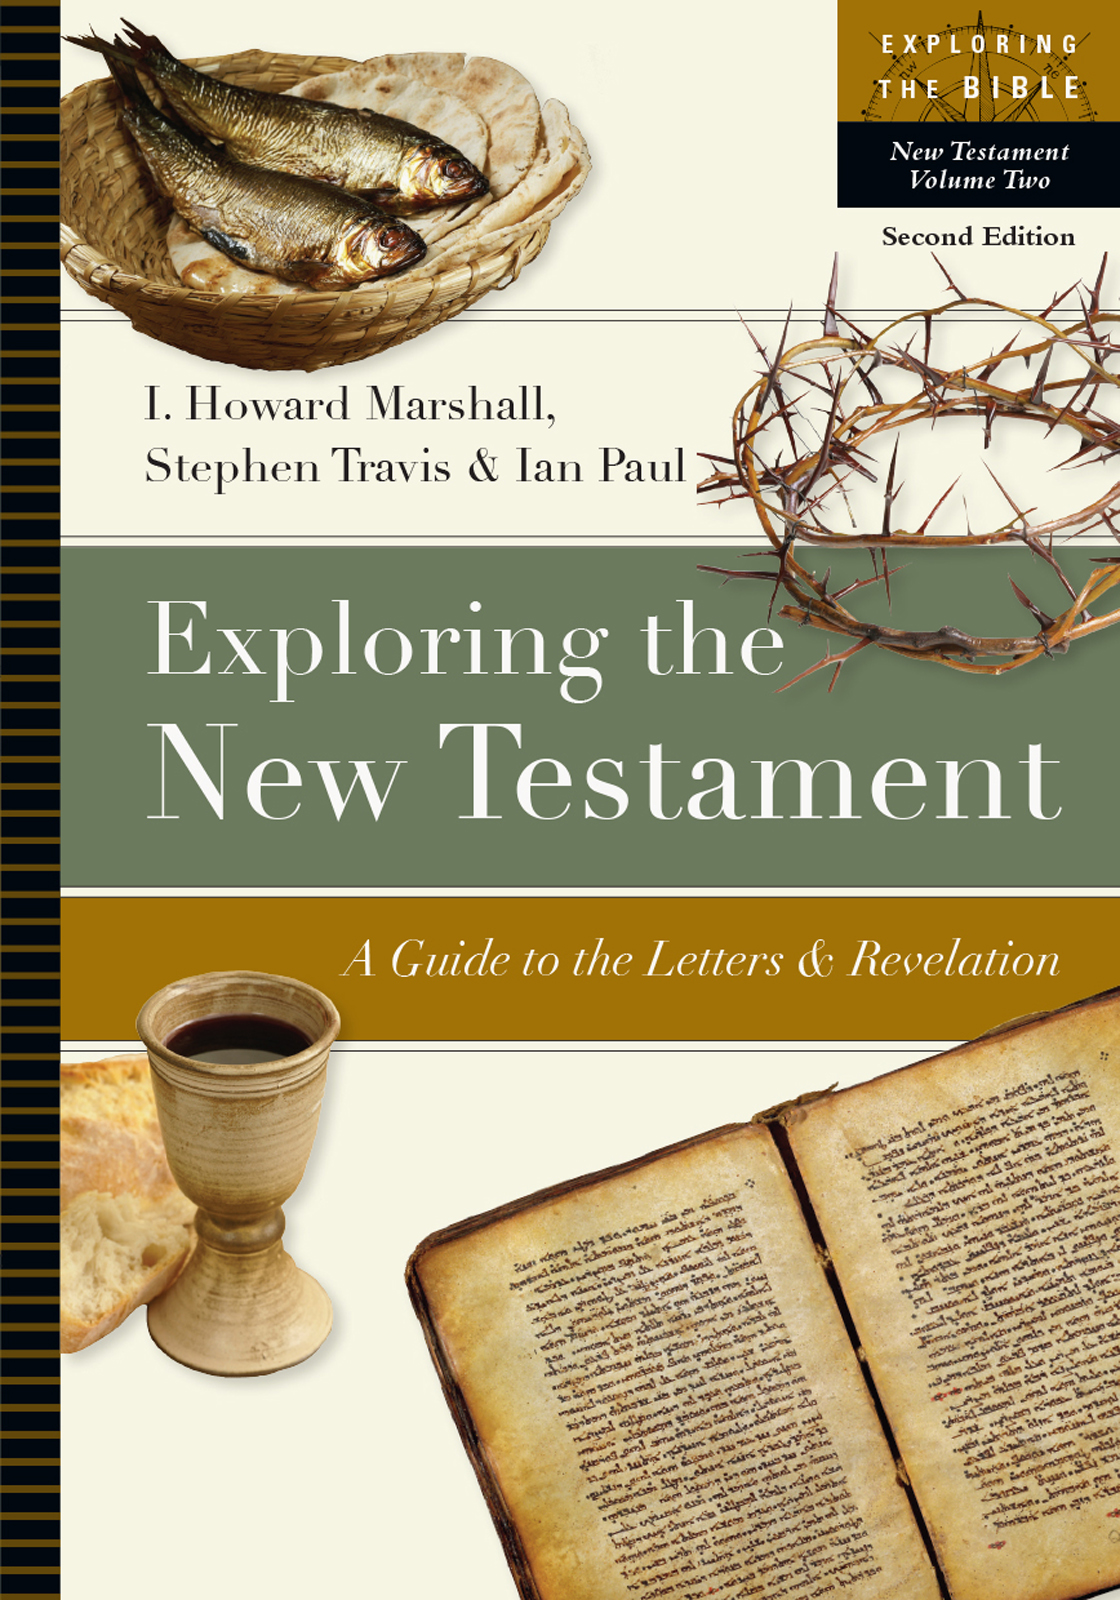 This image is the cover for the book Exploring the New Testament, Exploring the Bible Series